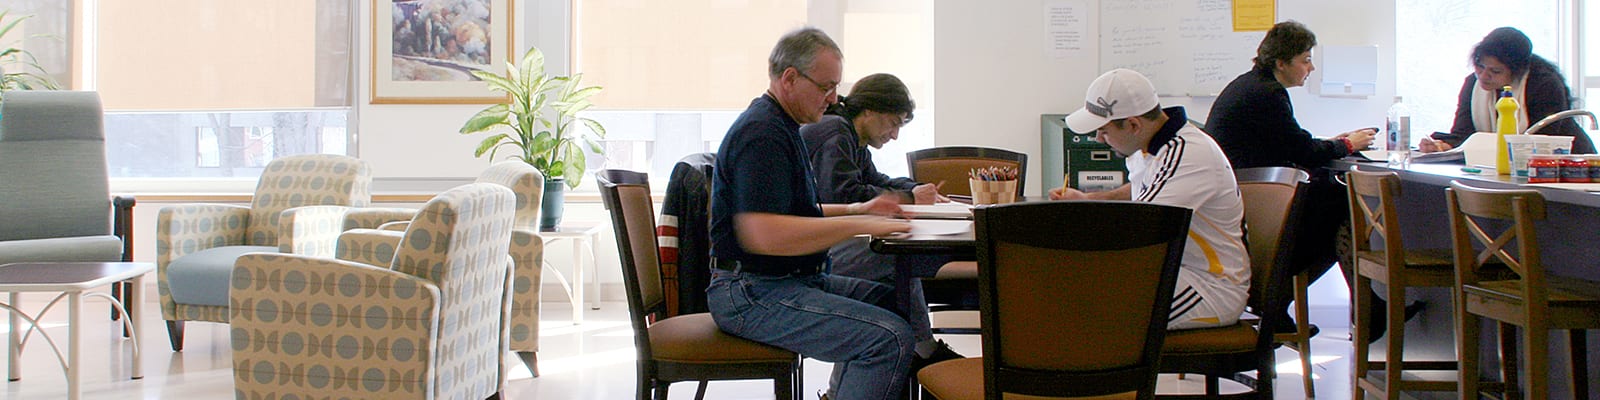 Photo of people sitting at tables and drawing.